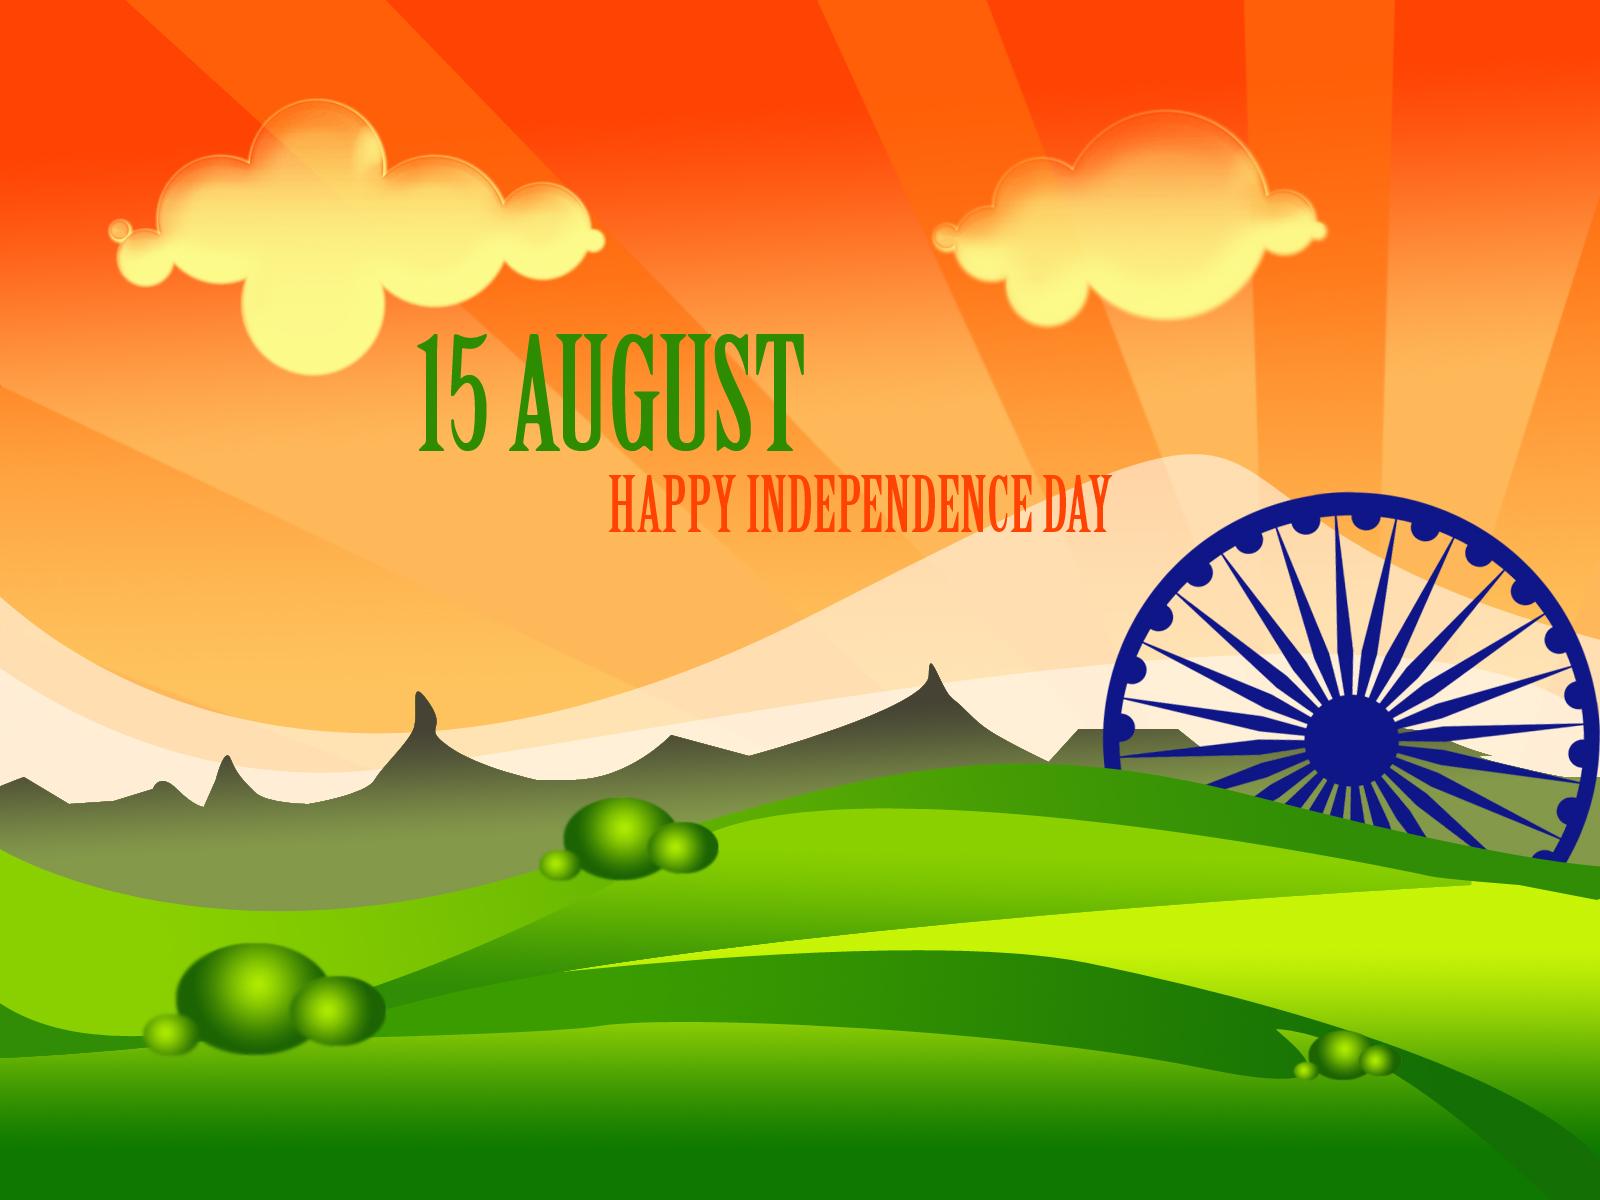 Happy Independence Day 2014 Image Wallpapers Photos Free Download